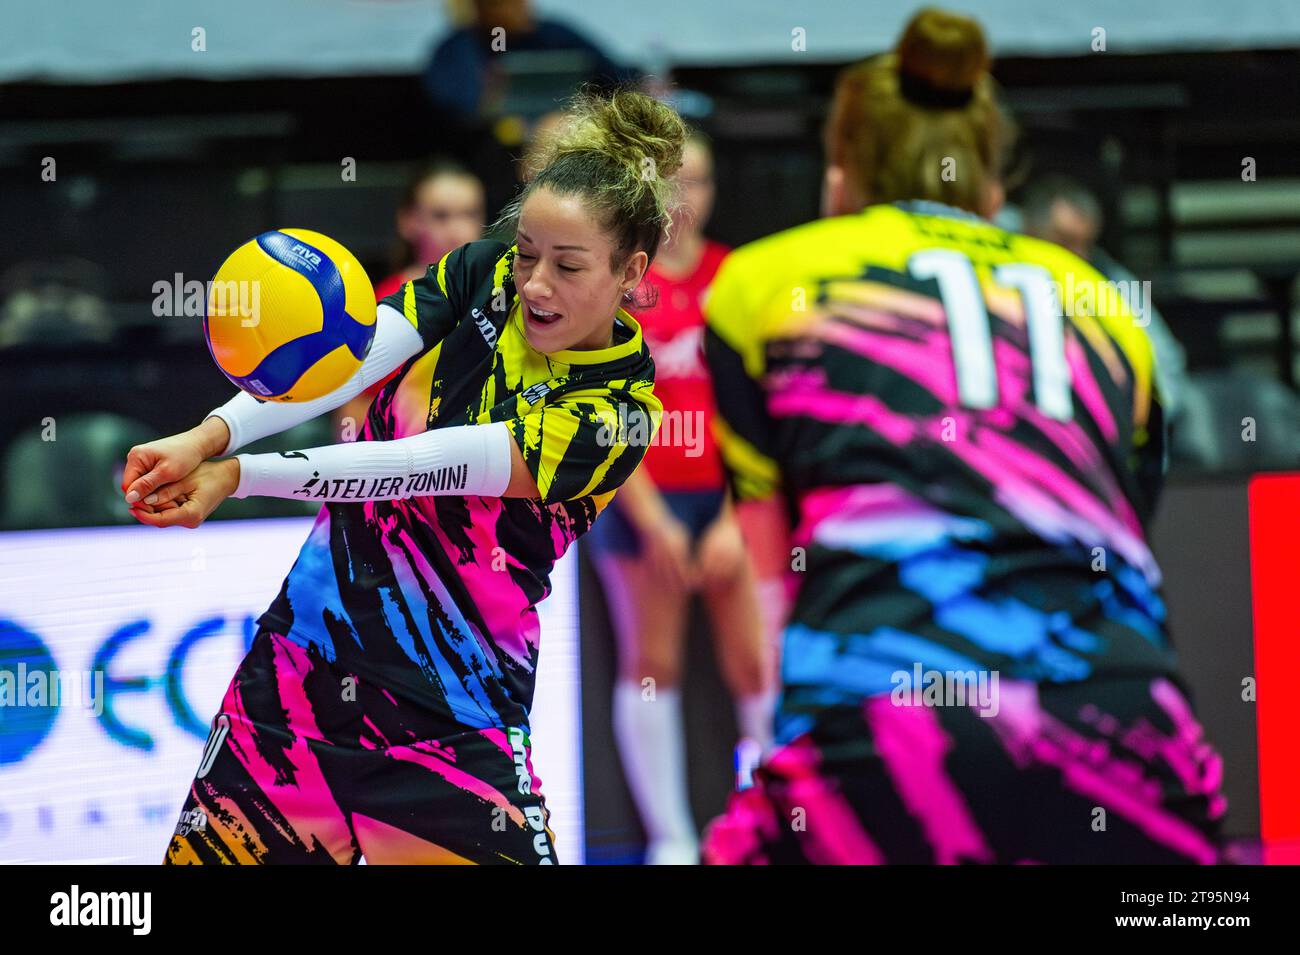 Treviso, Italy. 22nd Nov, 2023. Monica De Gennaro (L) and Isabelle Haak (R) of Prosecco Doc Imoco Conegliano seen warming up before the LVF Serie A1 2023/24 volleyball match between Prosecco Doc Imoco Conegliano and Roma Volley Club at Palaverde stadium. Final score; Prosecco Doc Imoco Conegliano 3:0 Roma Volley Club. (Photo by Alberto Gardin/SOPA Images/Sipa USA) Credit: Sipa USA/Alamy Live News Stock Photo